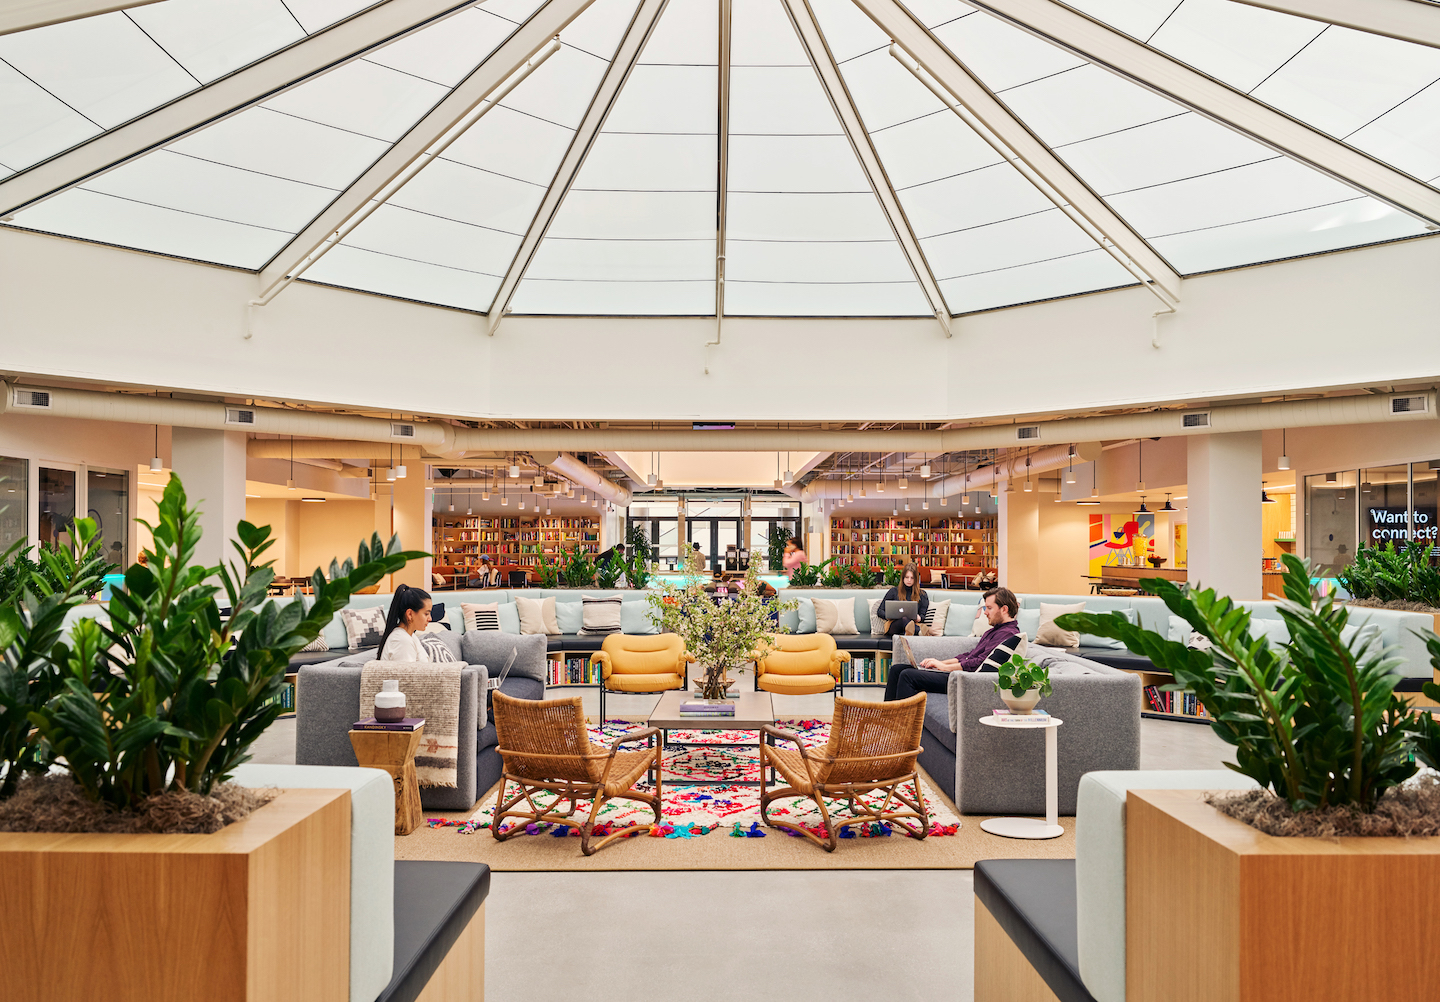 WeWork Pacific Design Center in California. Image courtesy of The We Company